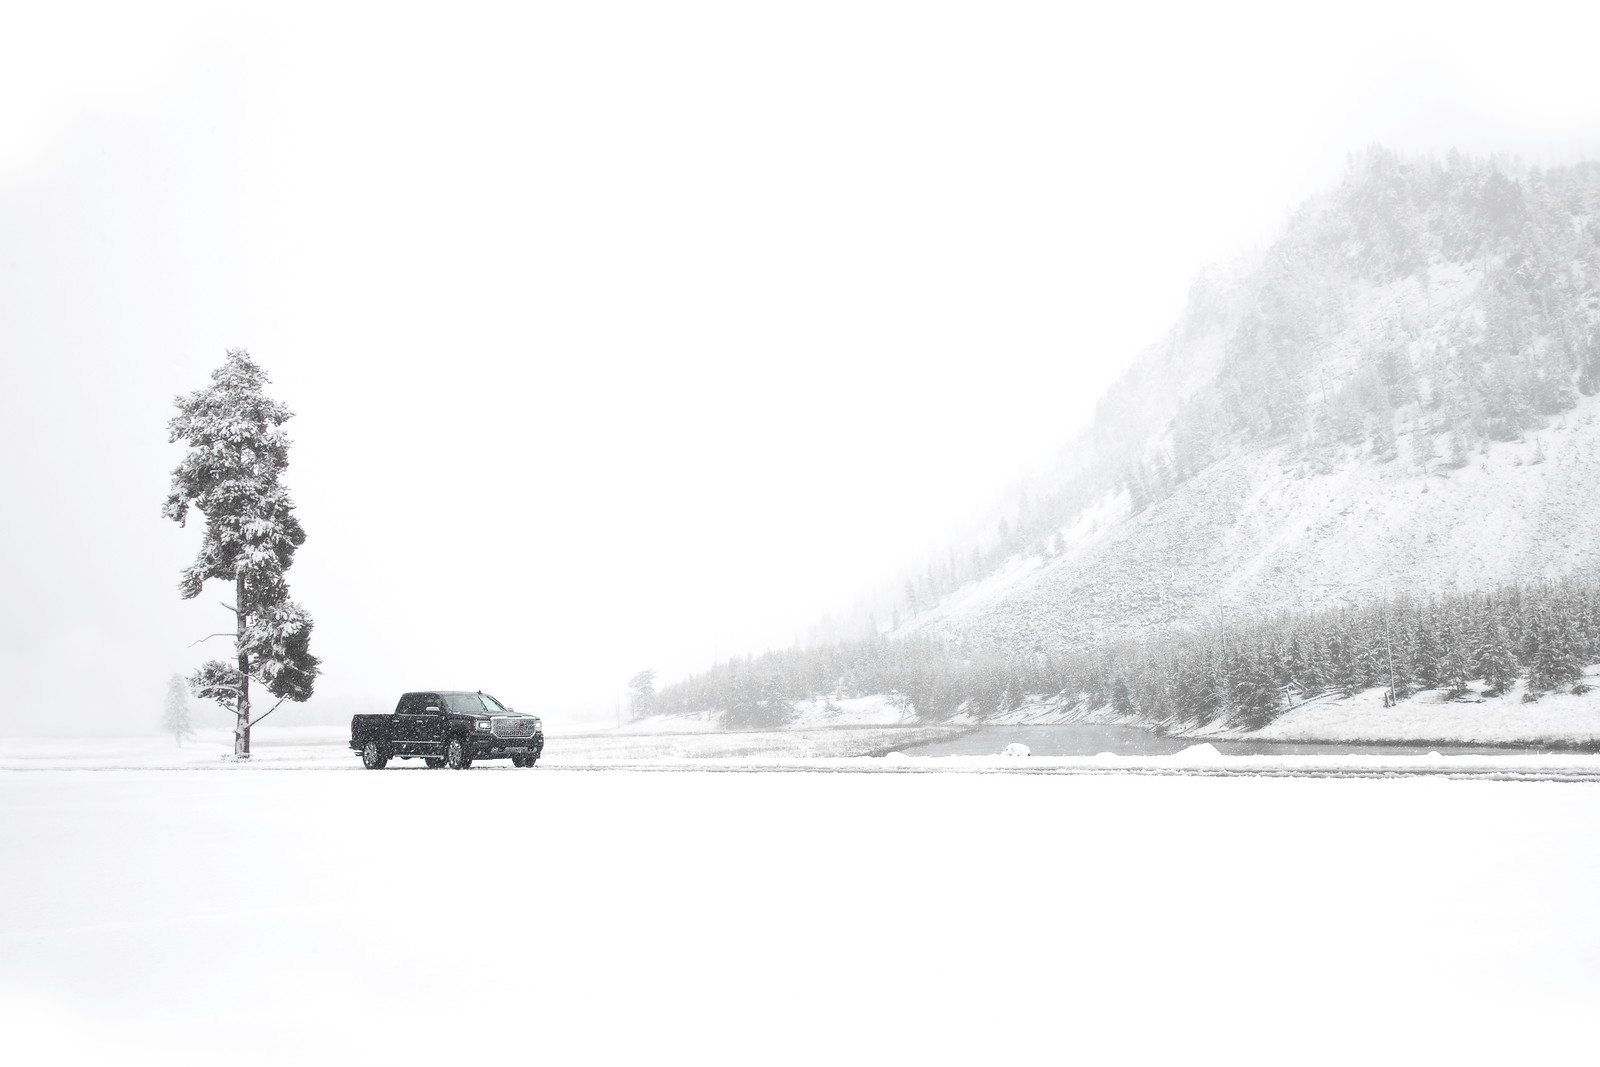 GMC Sierra Denali Truck outdoor commercial lifestyle Photography in the snowy Grand Tetons by Andrew Studer